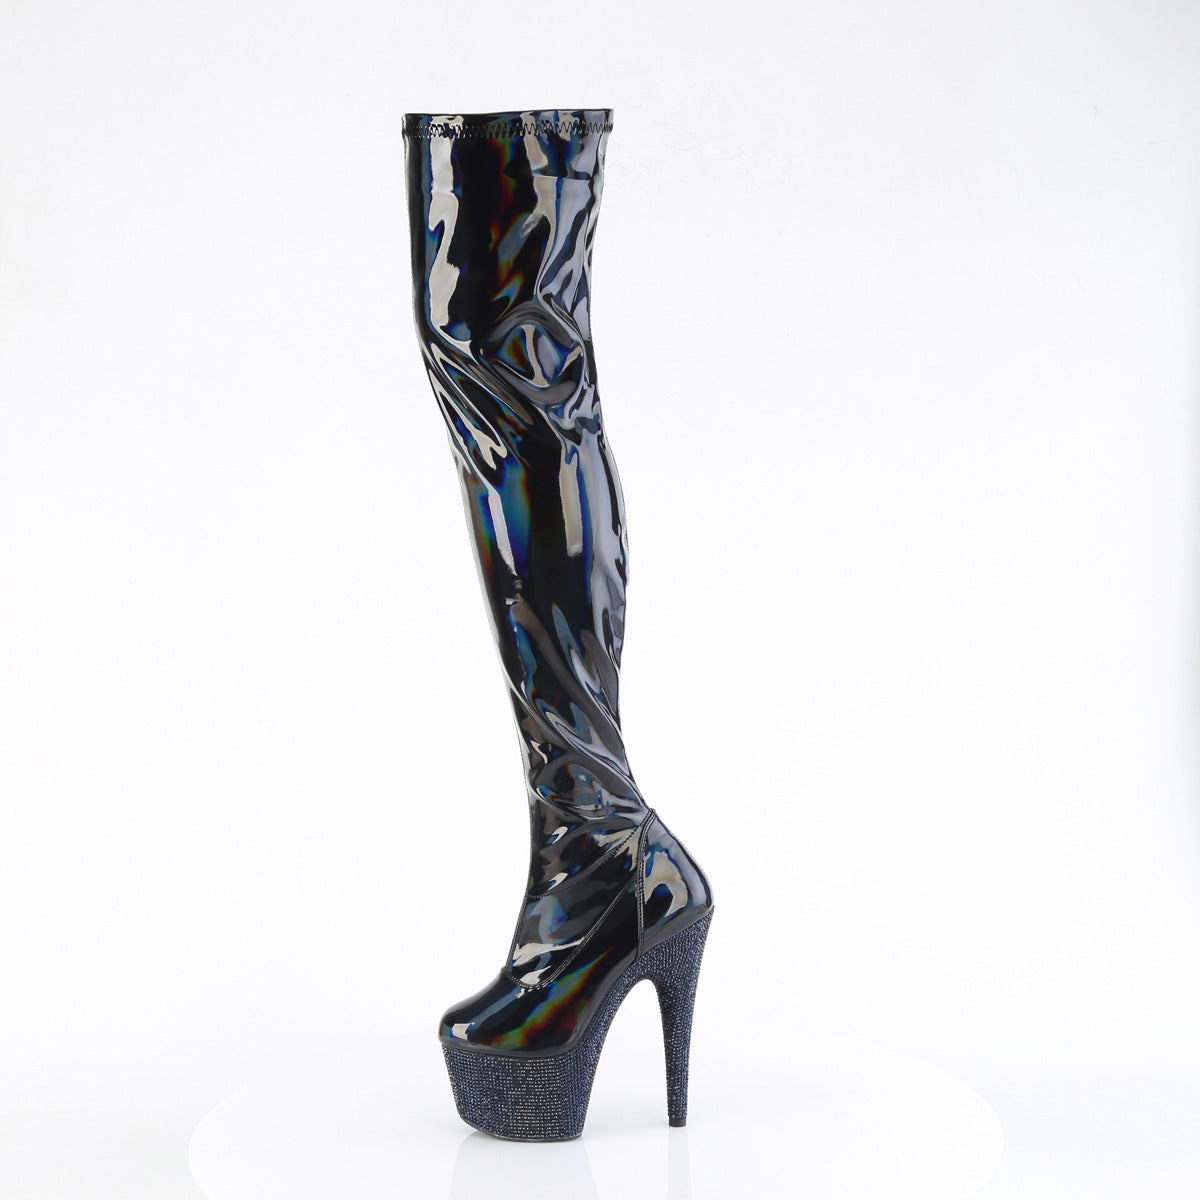 BEJEWELED-3000-7 Pleaser Black Stretch Holo Patentidnight Black Rhinestones Platform Shoes [Sexy Thigh High Boots]